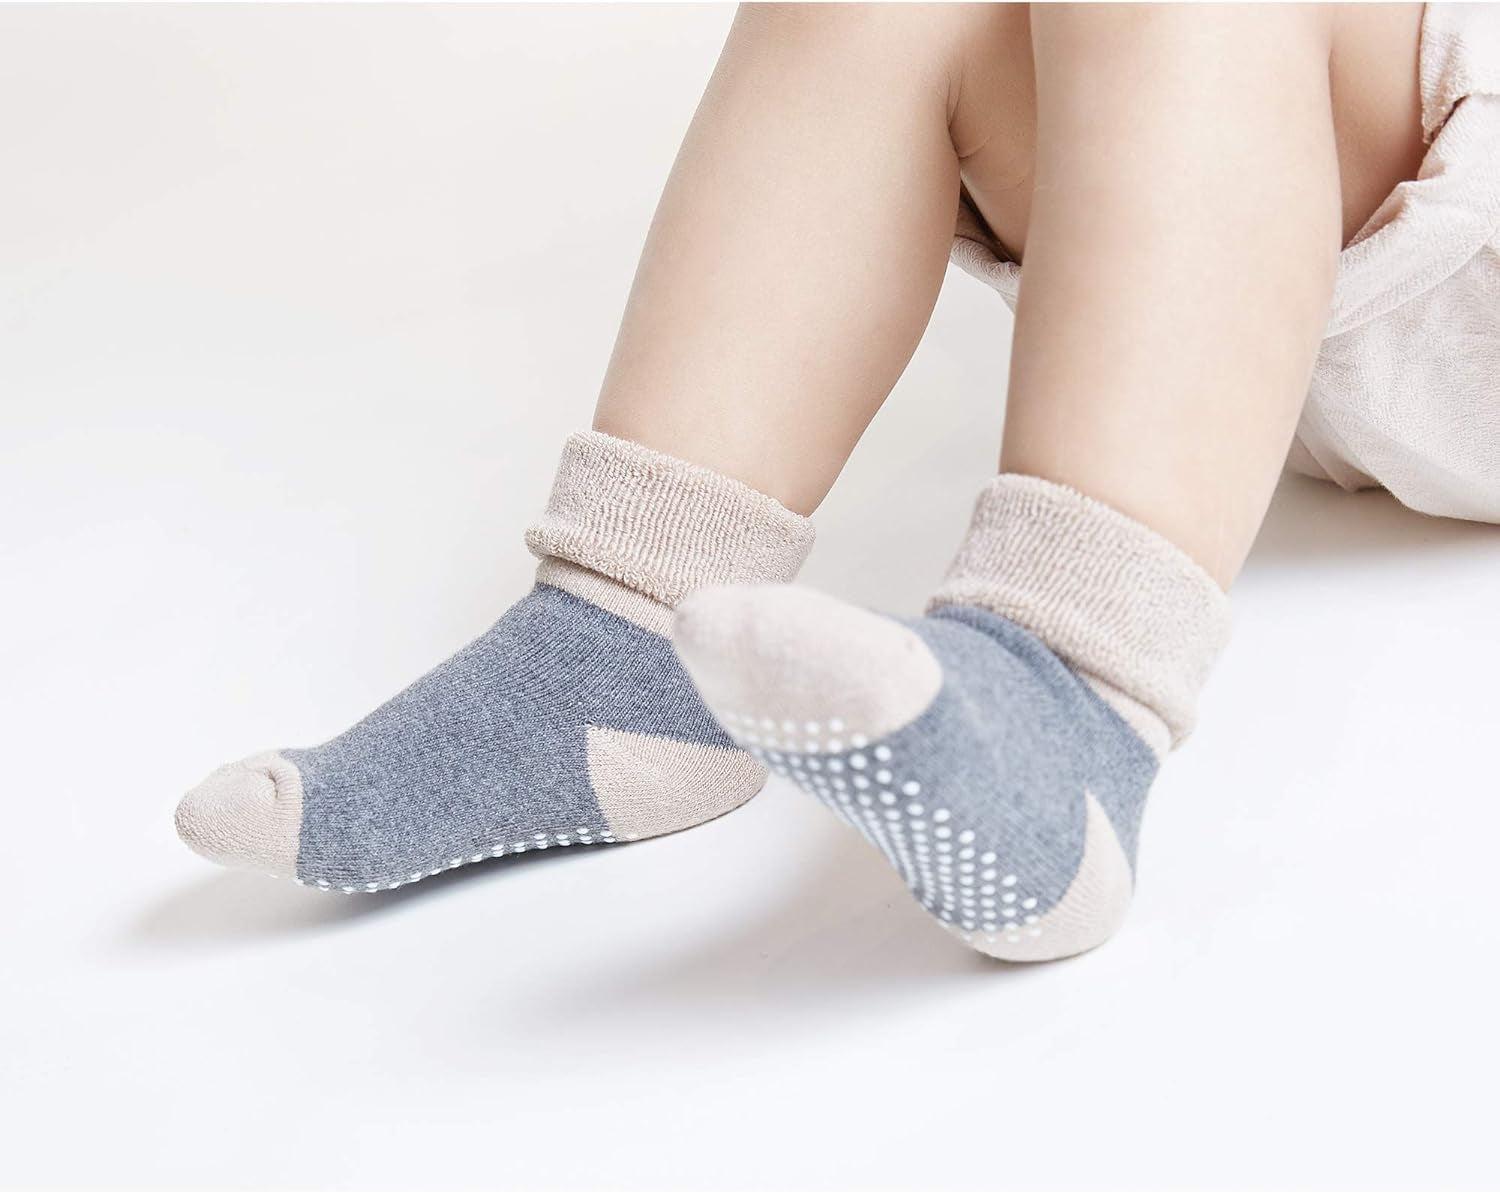 Baby Toddler Kids Ankle Crew Socks with Grips Unisex Warm Thick Cotton Winter Socks 0-10T 6/8 Pack